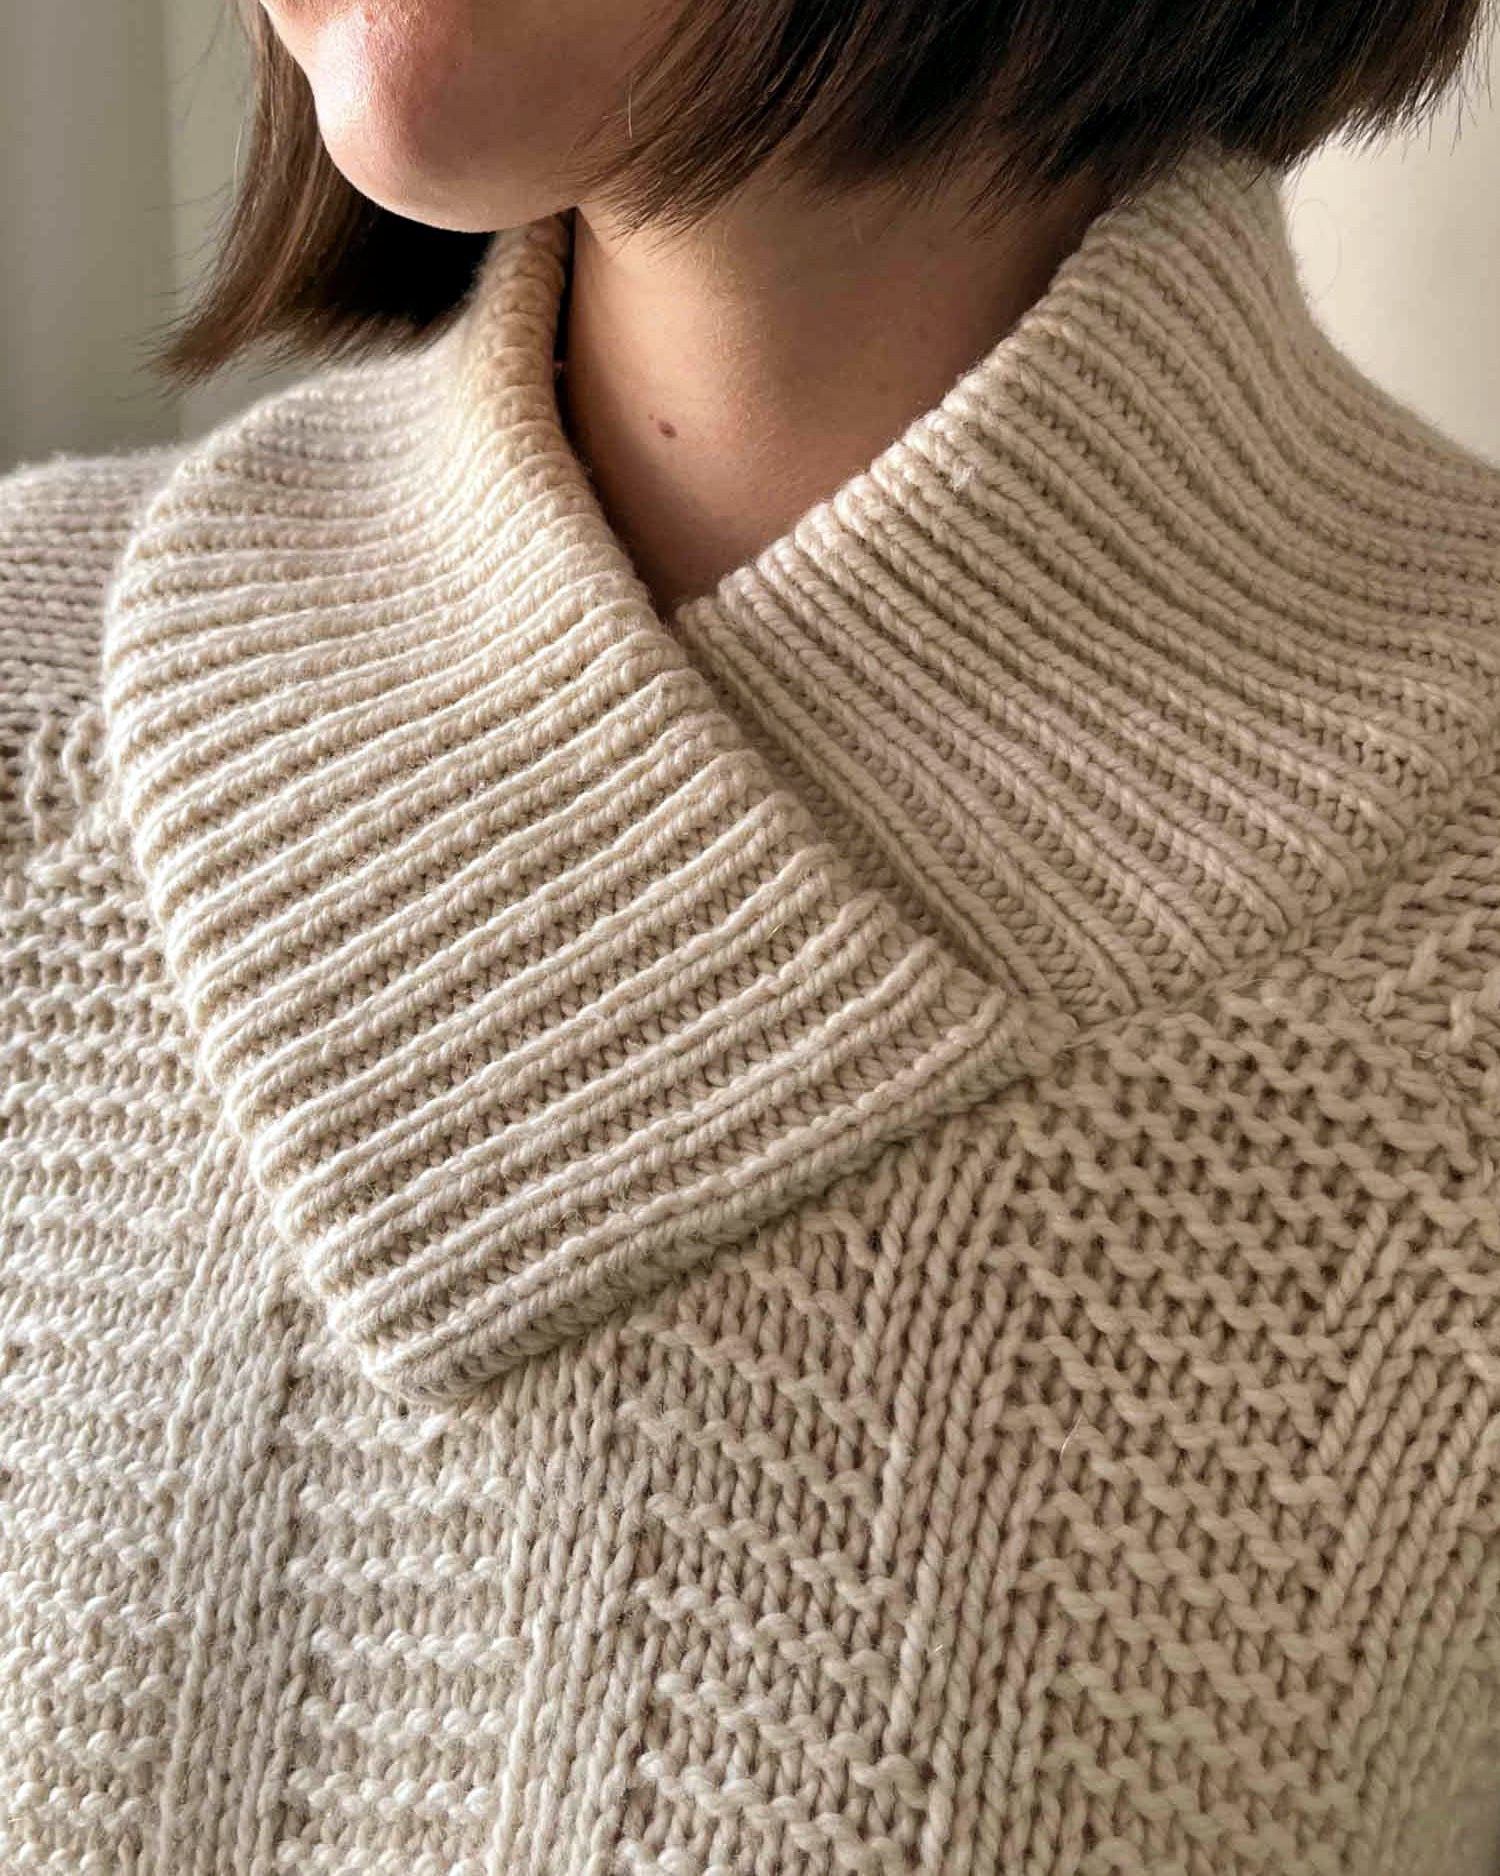 Barney's Thick Cashmere Sweater - Lucky Vintage